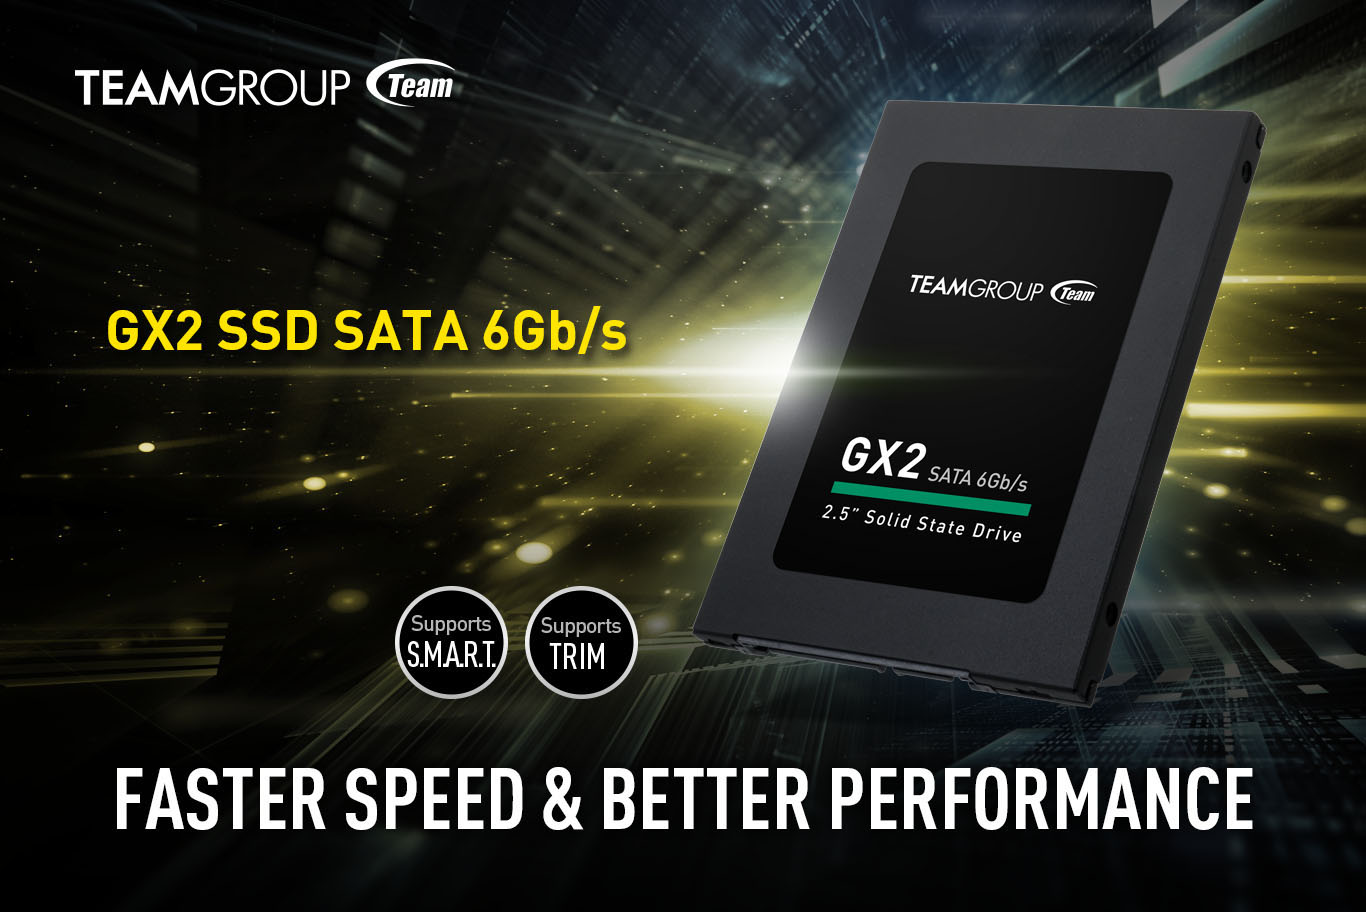 Team Group GX2 SSD SATA 6Gb/s banner showing the SSD standing up facing to the left, with text that reads: Supports S.M.A.R.T. and Supports TRIM - Faster Speed & Better Performance